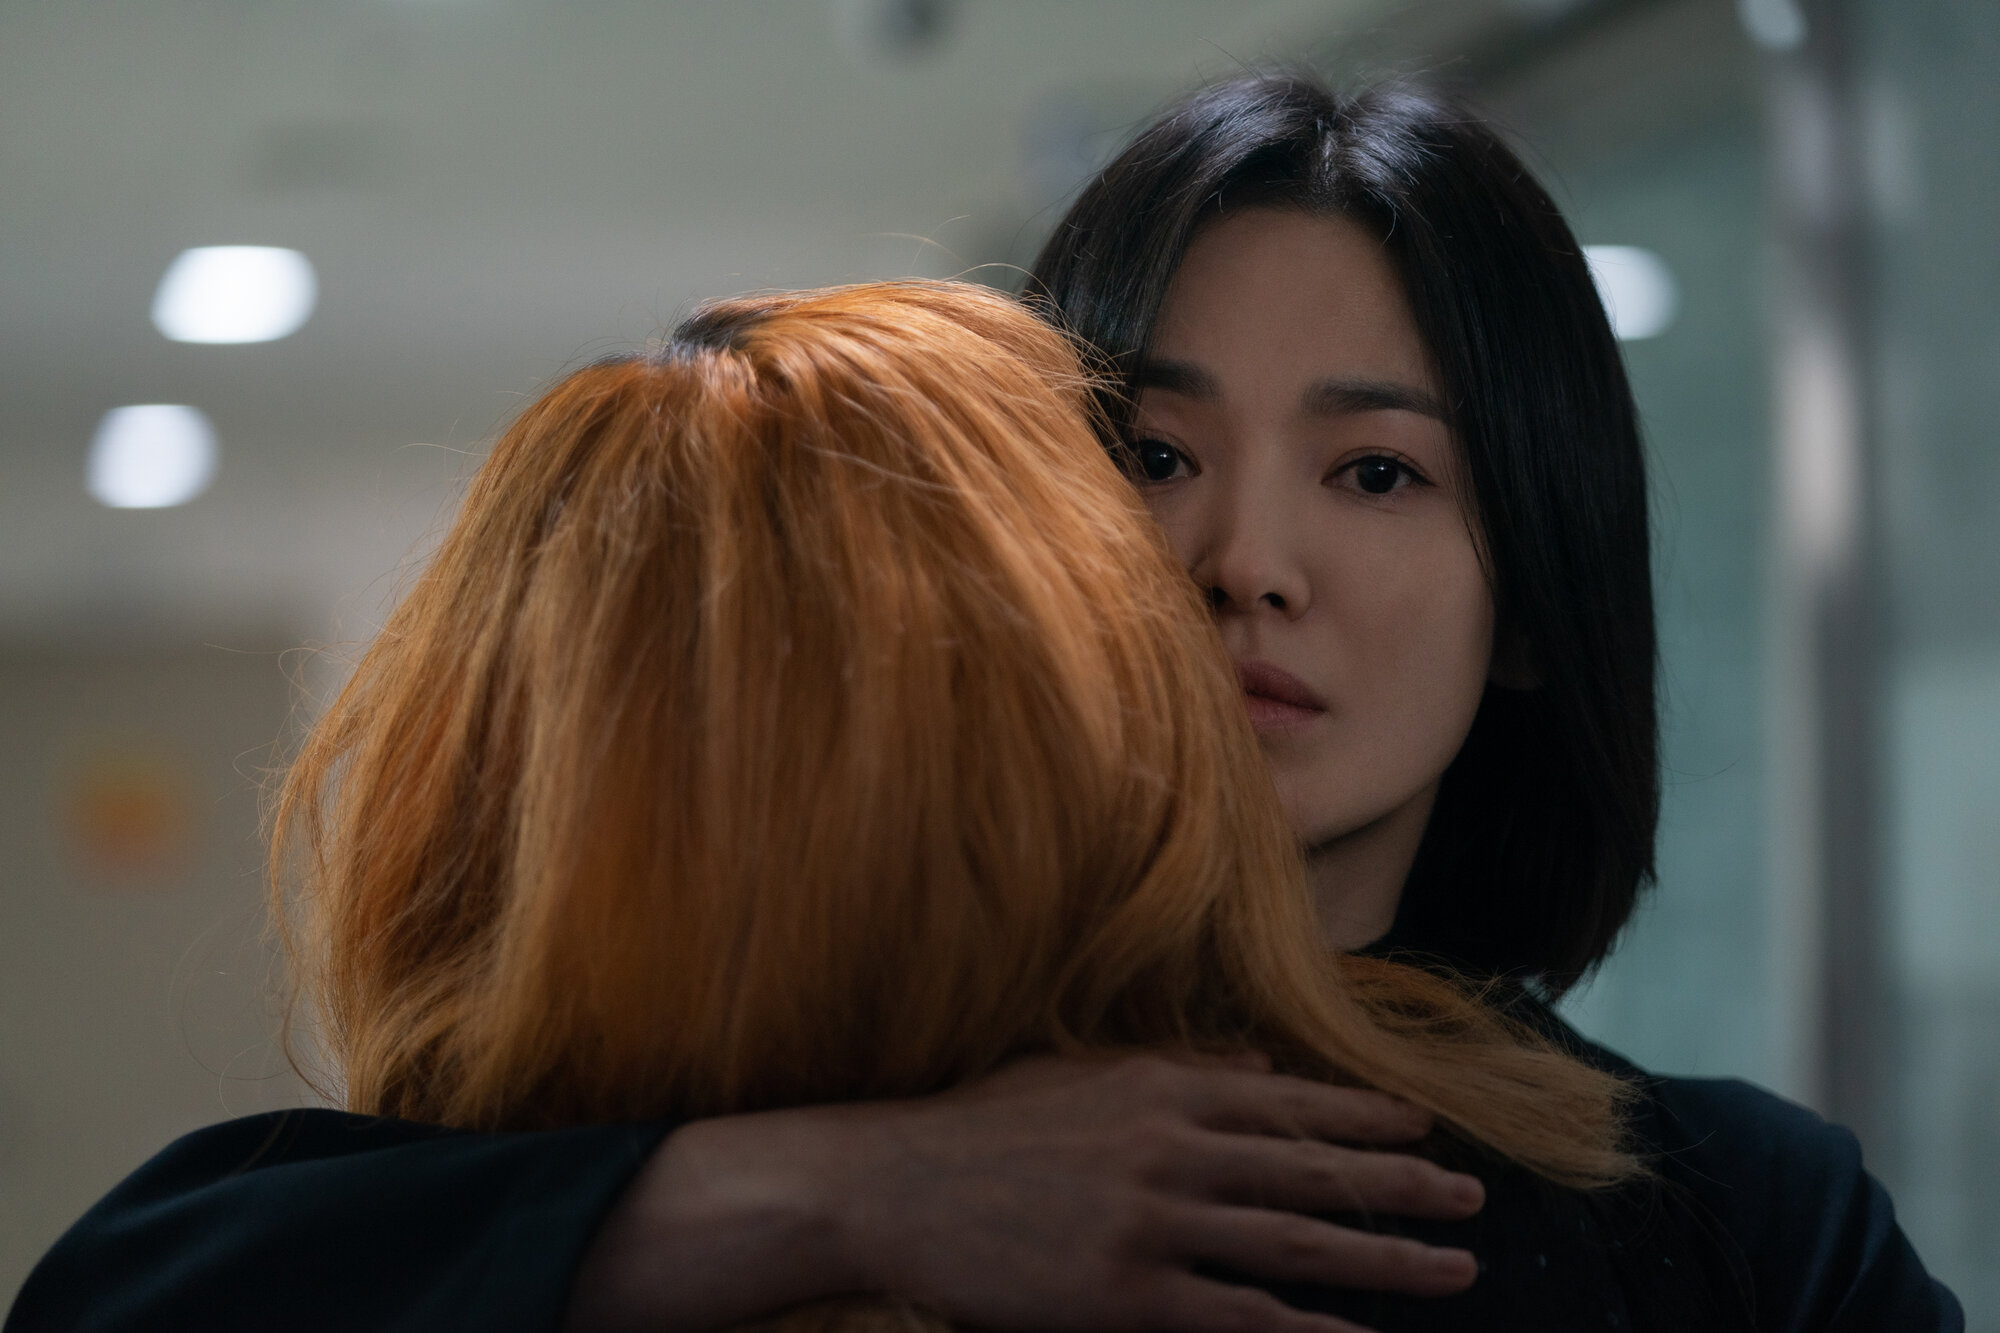 The Glory Part 2 Brings A Chilling End To Netflixs Revenge Drama Starring Song Hye Kyo 